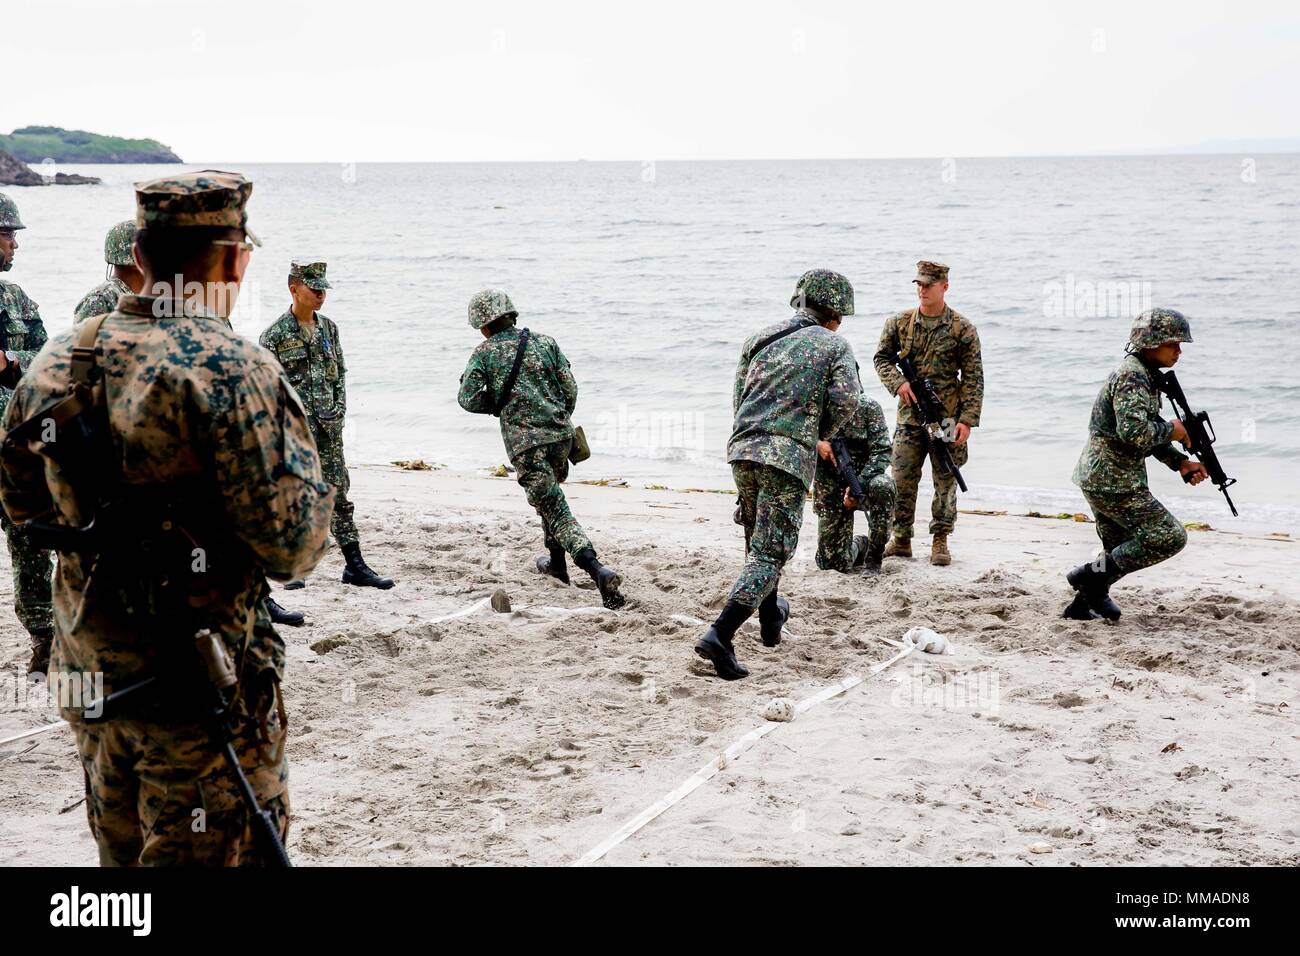 U.S. and Philippine Marines tape off the beach to simulate the dimensions of a room while conducting room clearing exercises at Marine Base Gregorio Lim, Ternate, Philippines, Oct. 2. The Marines are participating in KAMANDAG, a bilateral exercise that increases the ability of the U.S. and the Philippines to rapidly respond to terrorist threats and humanitarian crises. KAMANDAG is an acronym for the Filipino phrase 'Kaagapay Ng Maddirigma Ng Dagat,' which translates to 'Cooperation of Warriors of the Sea.' (U.S. Embassy Manila courtesy photo by Paul Putong) Stock Photo